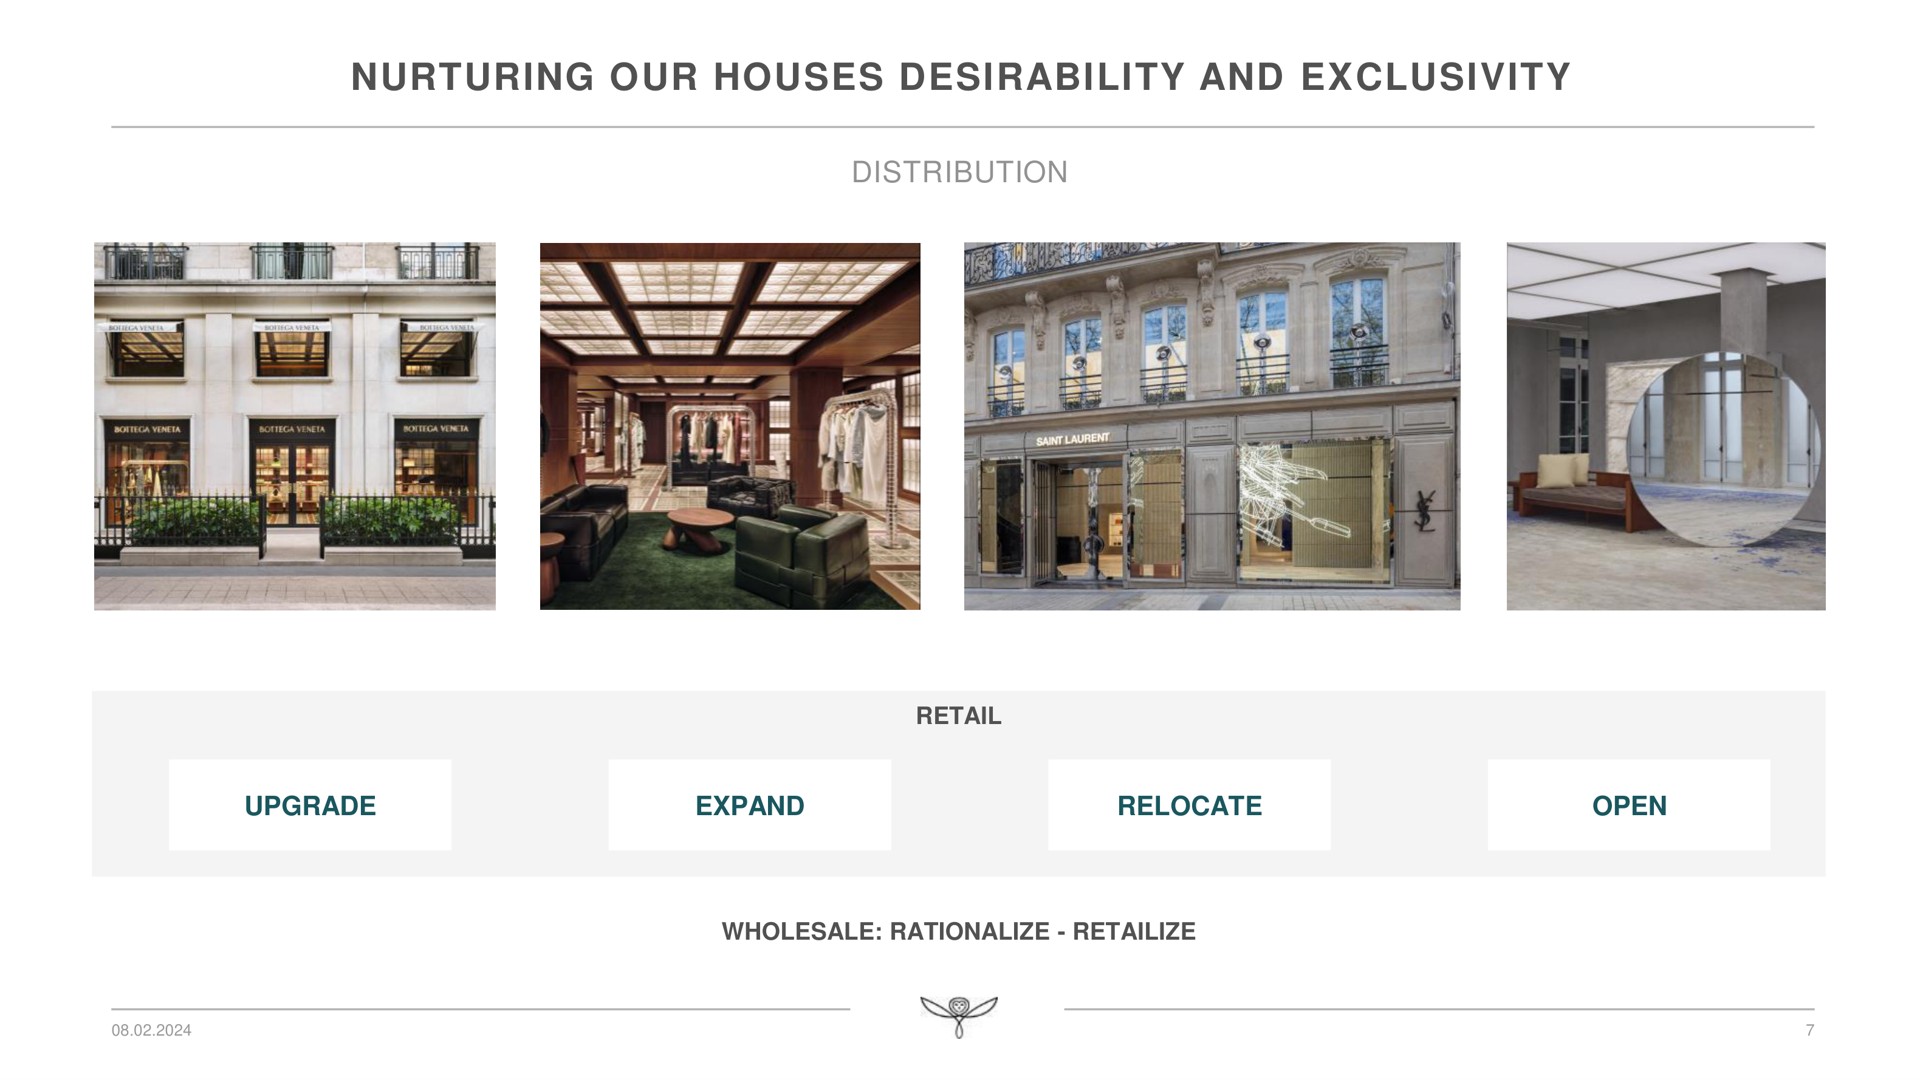 nurturing our houses desirability and exclusivity | Kering